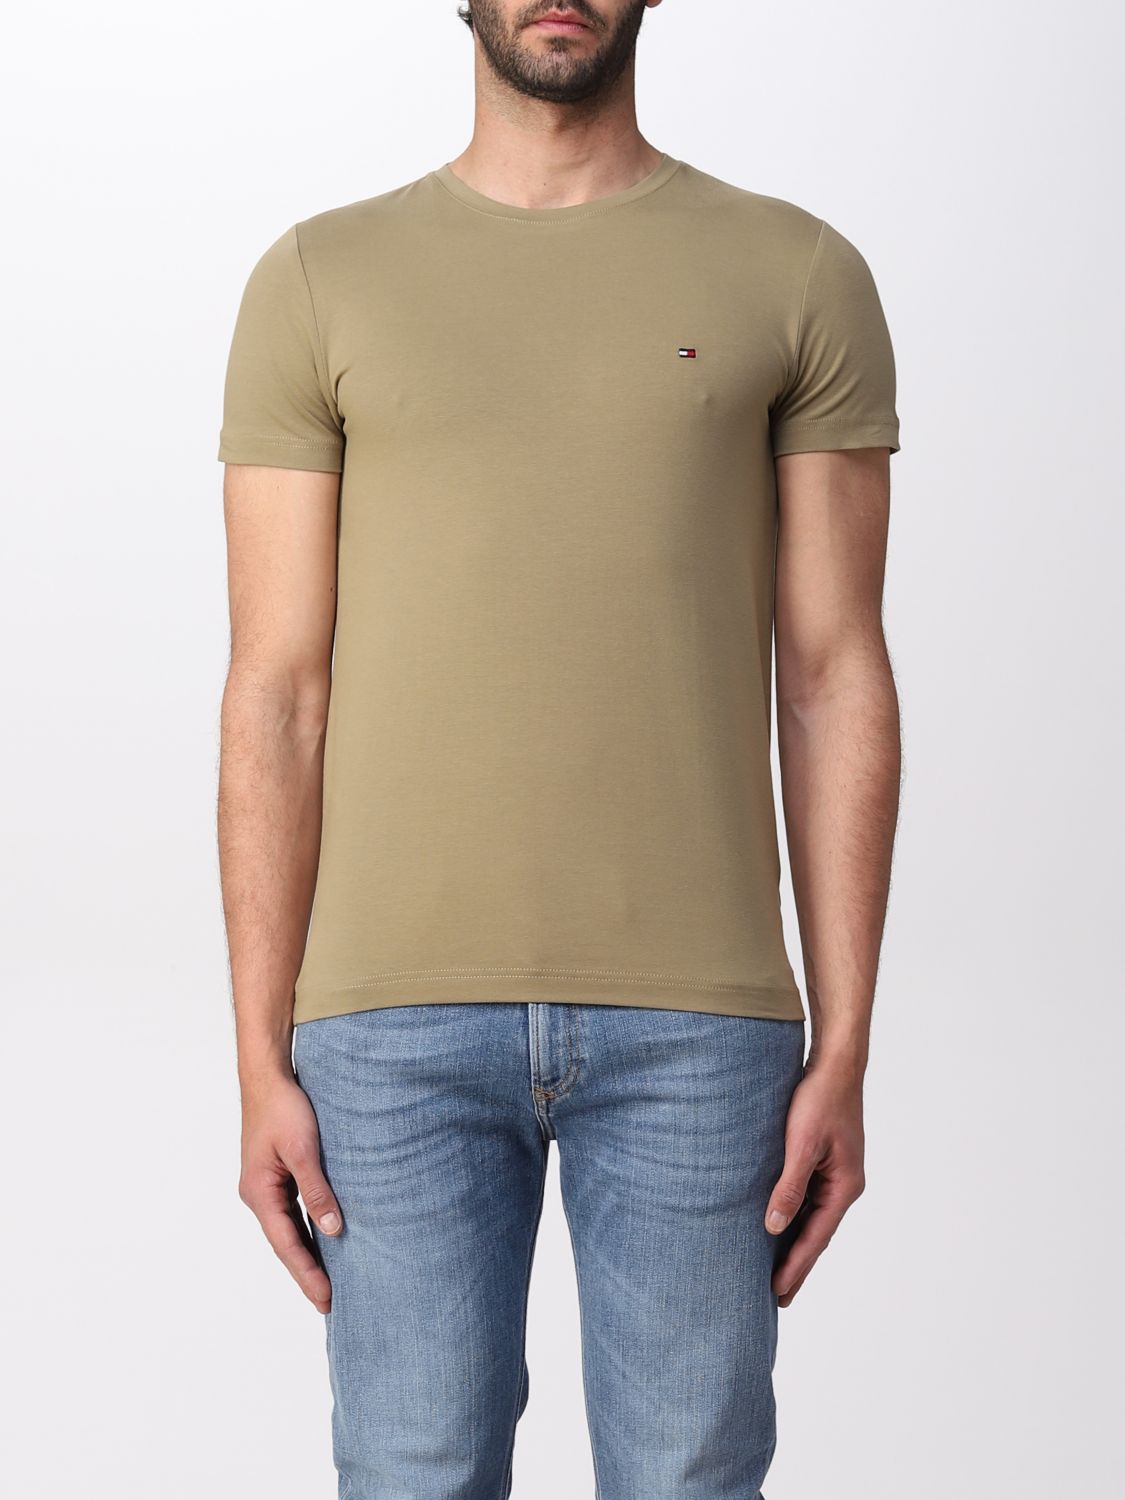 Tommy Hilfiger Outlet: T-shirt men - Brown | Tommy Hilfiger t-shirt MW0MW10800 on GIGLIO.COM